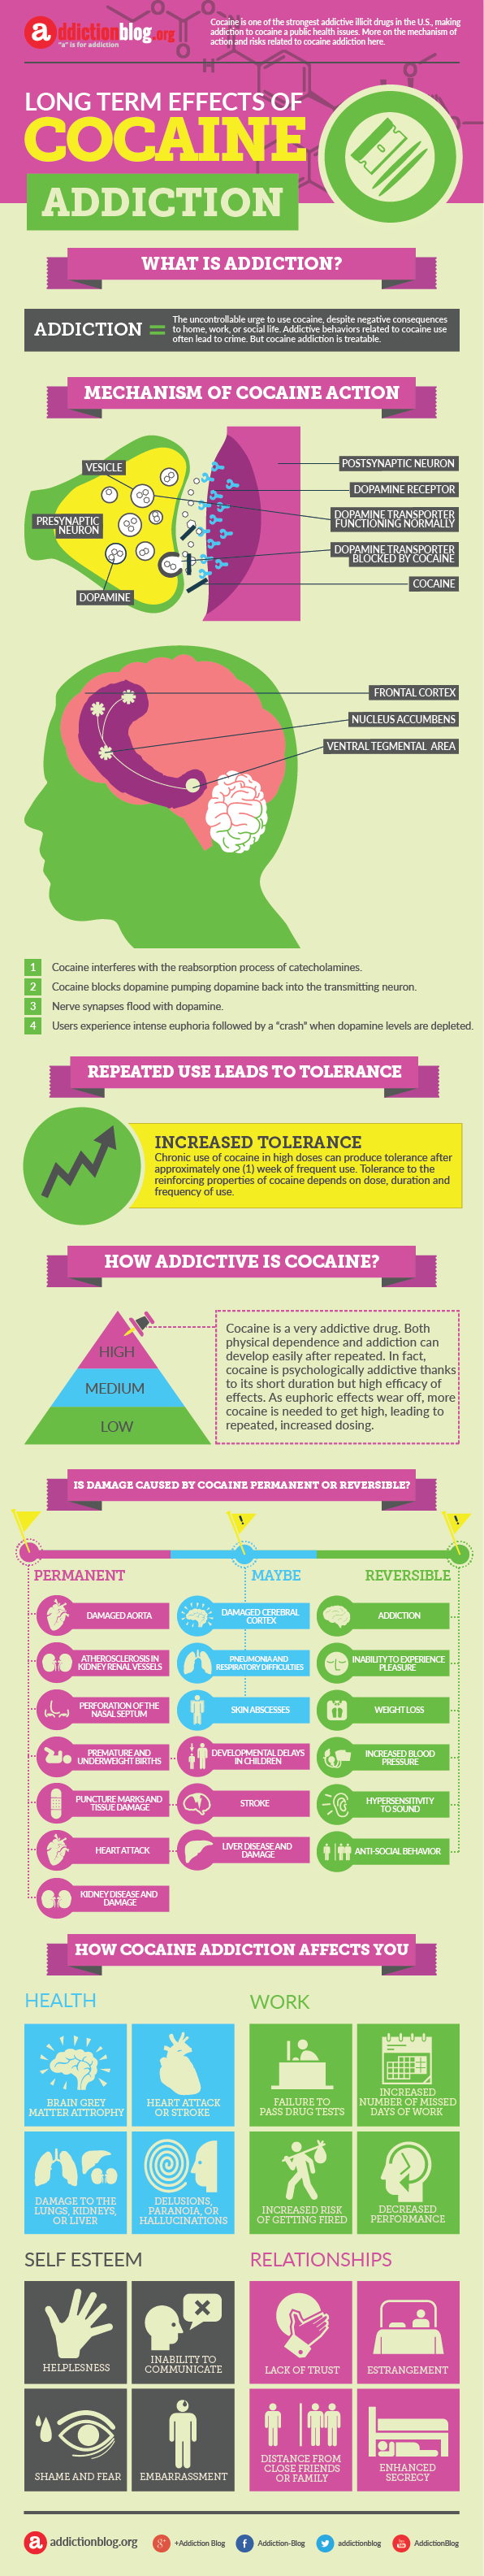 Long term effects of cocaine addiction (INFOGRAPHIC)